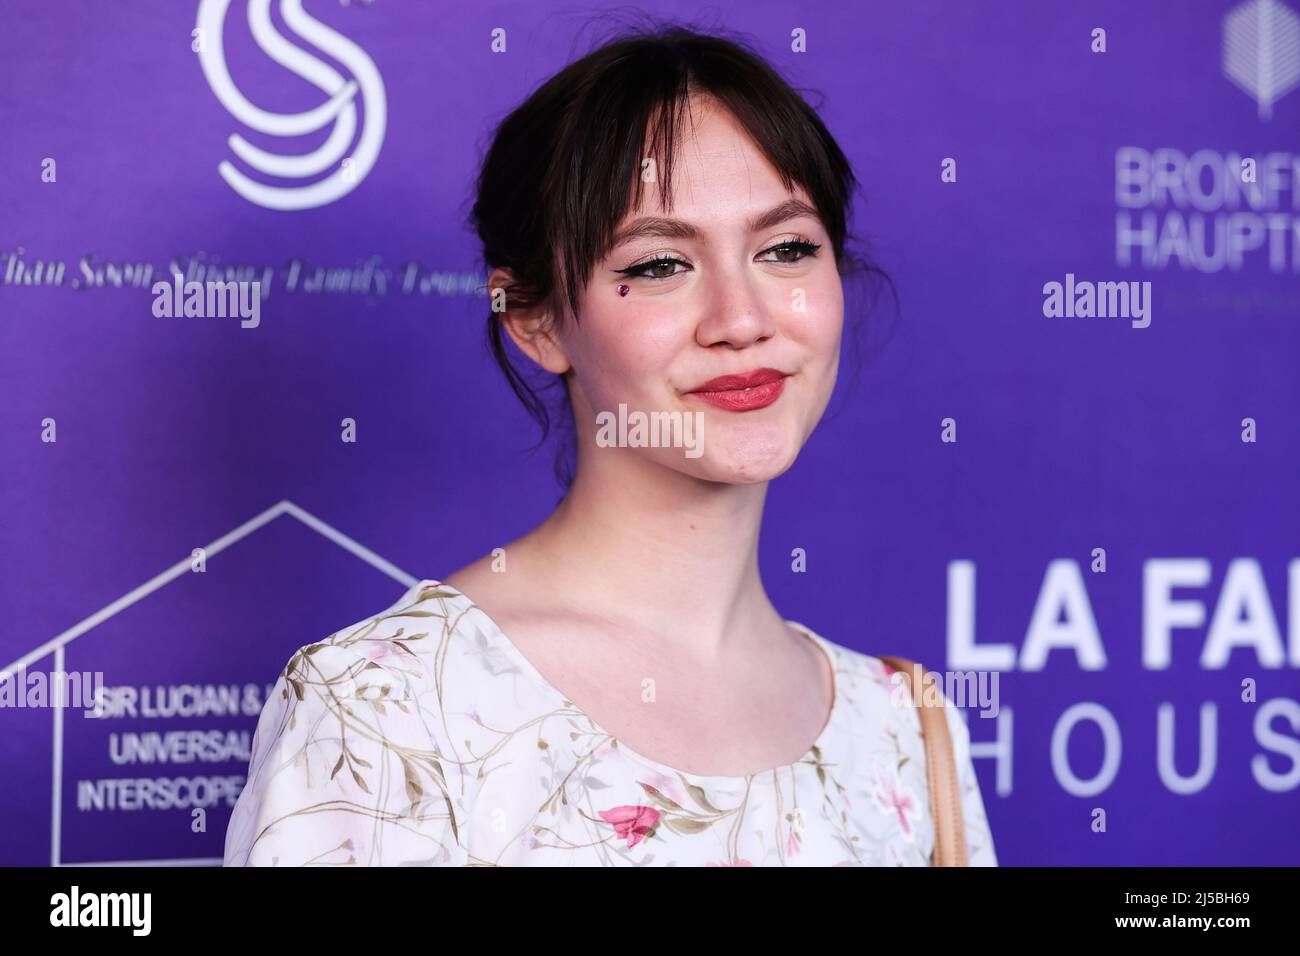 Hollywood, USA. 21st Apr, 2022. WEST HOLLYWOOD, LOS ANGELES, CALIFORNIA, USA - APRIL 21: American actress Iris Apatow arrives at the LA Family Housing (LAFH) Awards 2022 held at the Pacific Design Center on April 21, 2022 in West Hollywood, Los Angeles, California, United States. (Photo by Xavier Collin/Image Press Agency) Credit: Image Press Agency/Alamy Live News Stock Photo